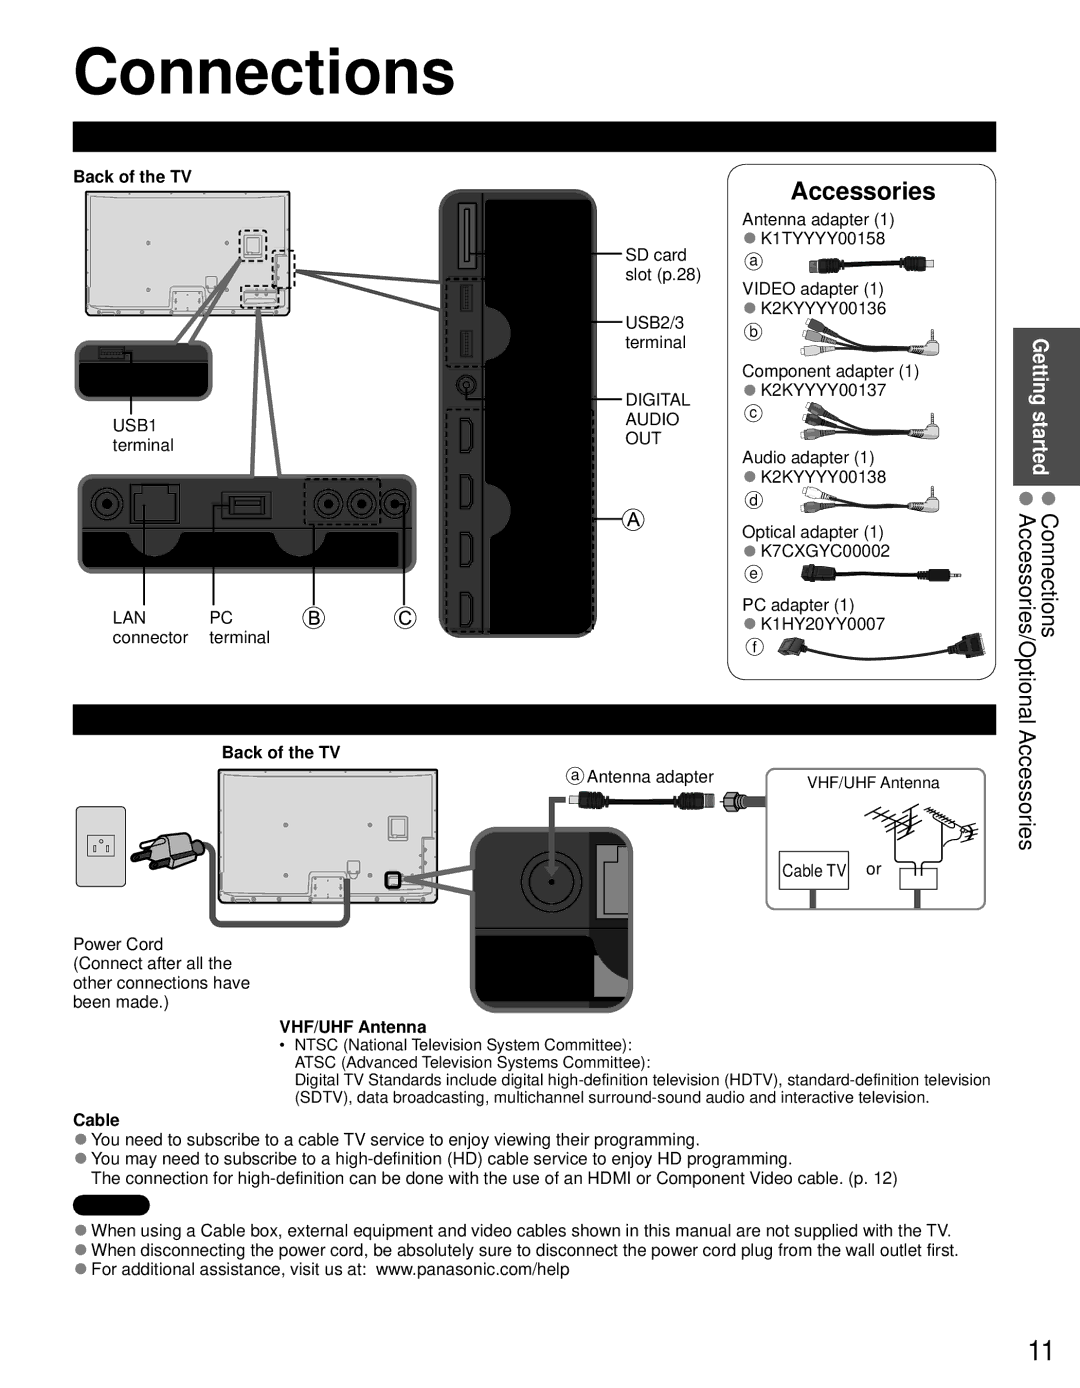 Panasonic TC-P55GT31 owner manual Connections, Accessories, Connection Panels, Antenna or Cable connection 